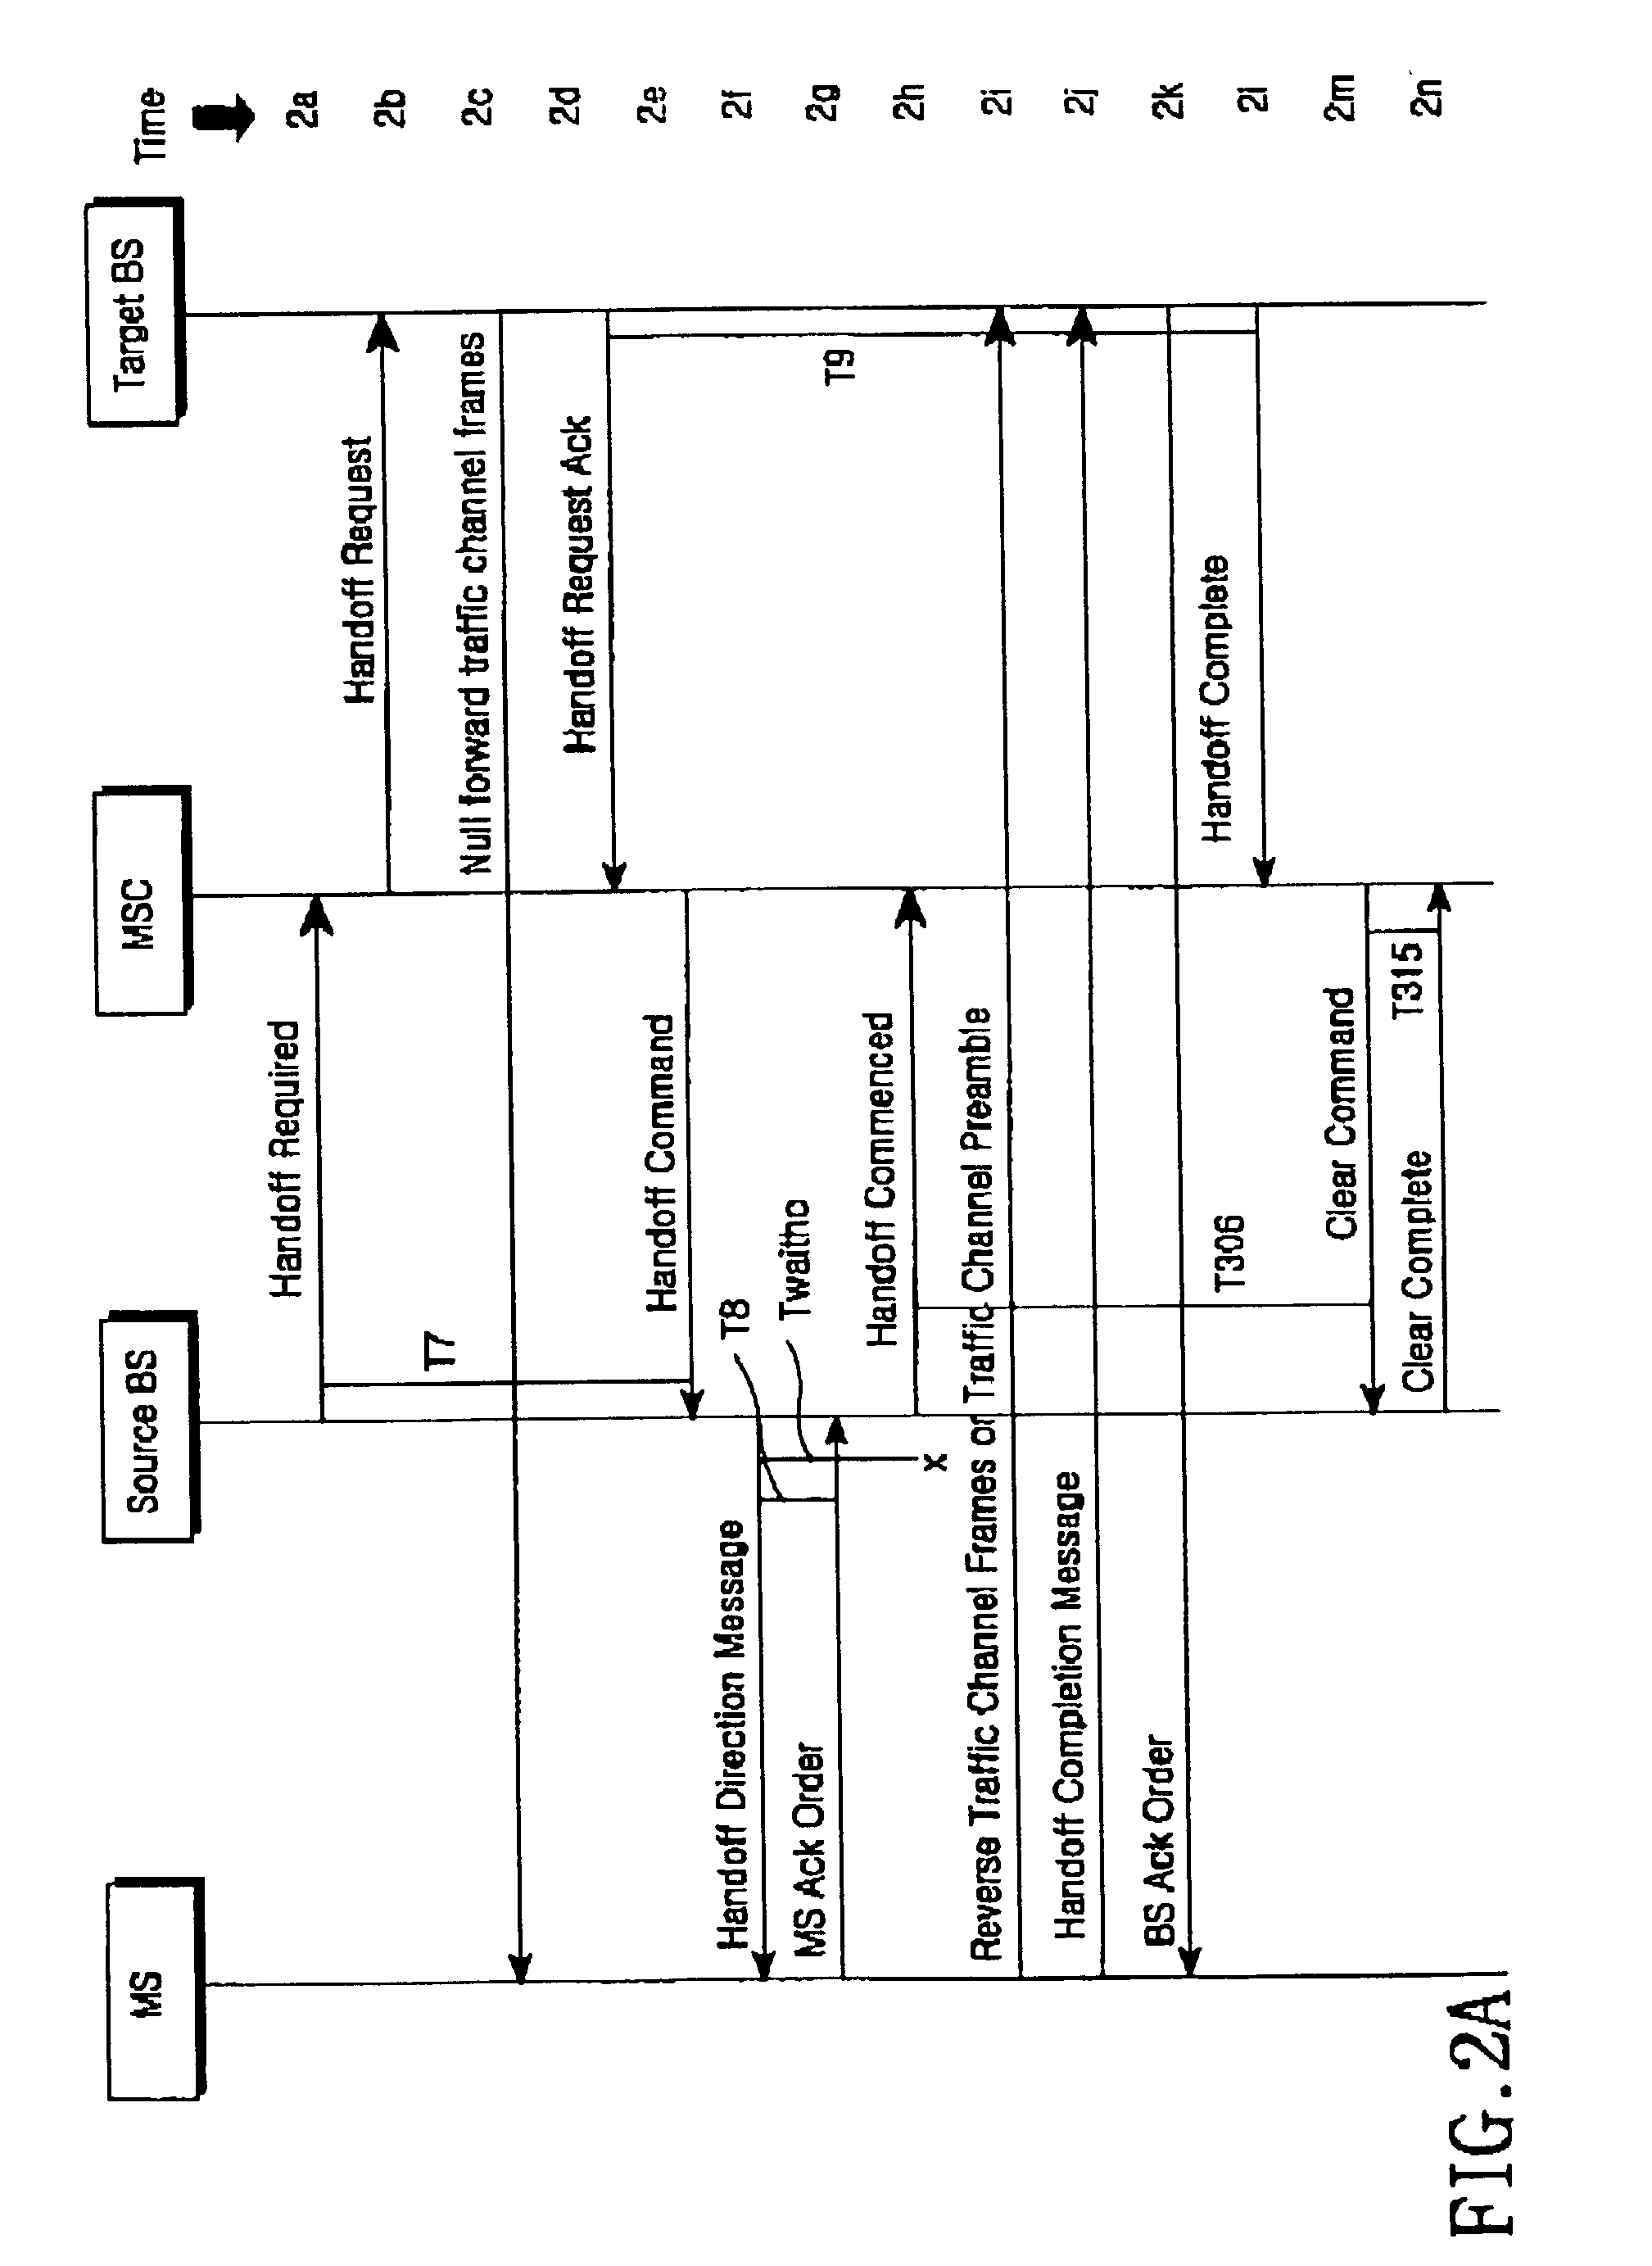 Method of supporting reverse FCH gating in base station of a mobile communication system